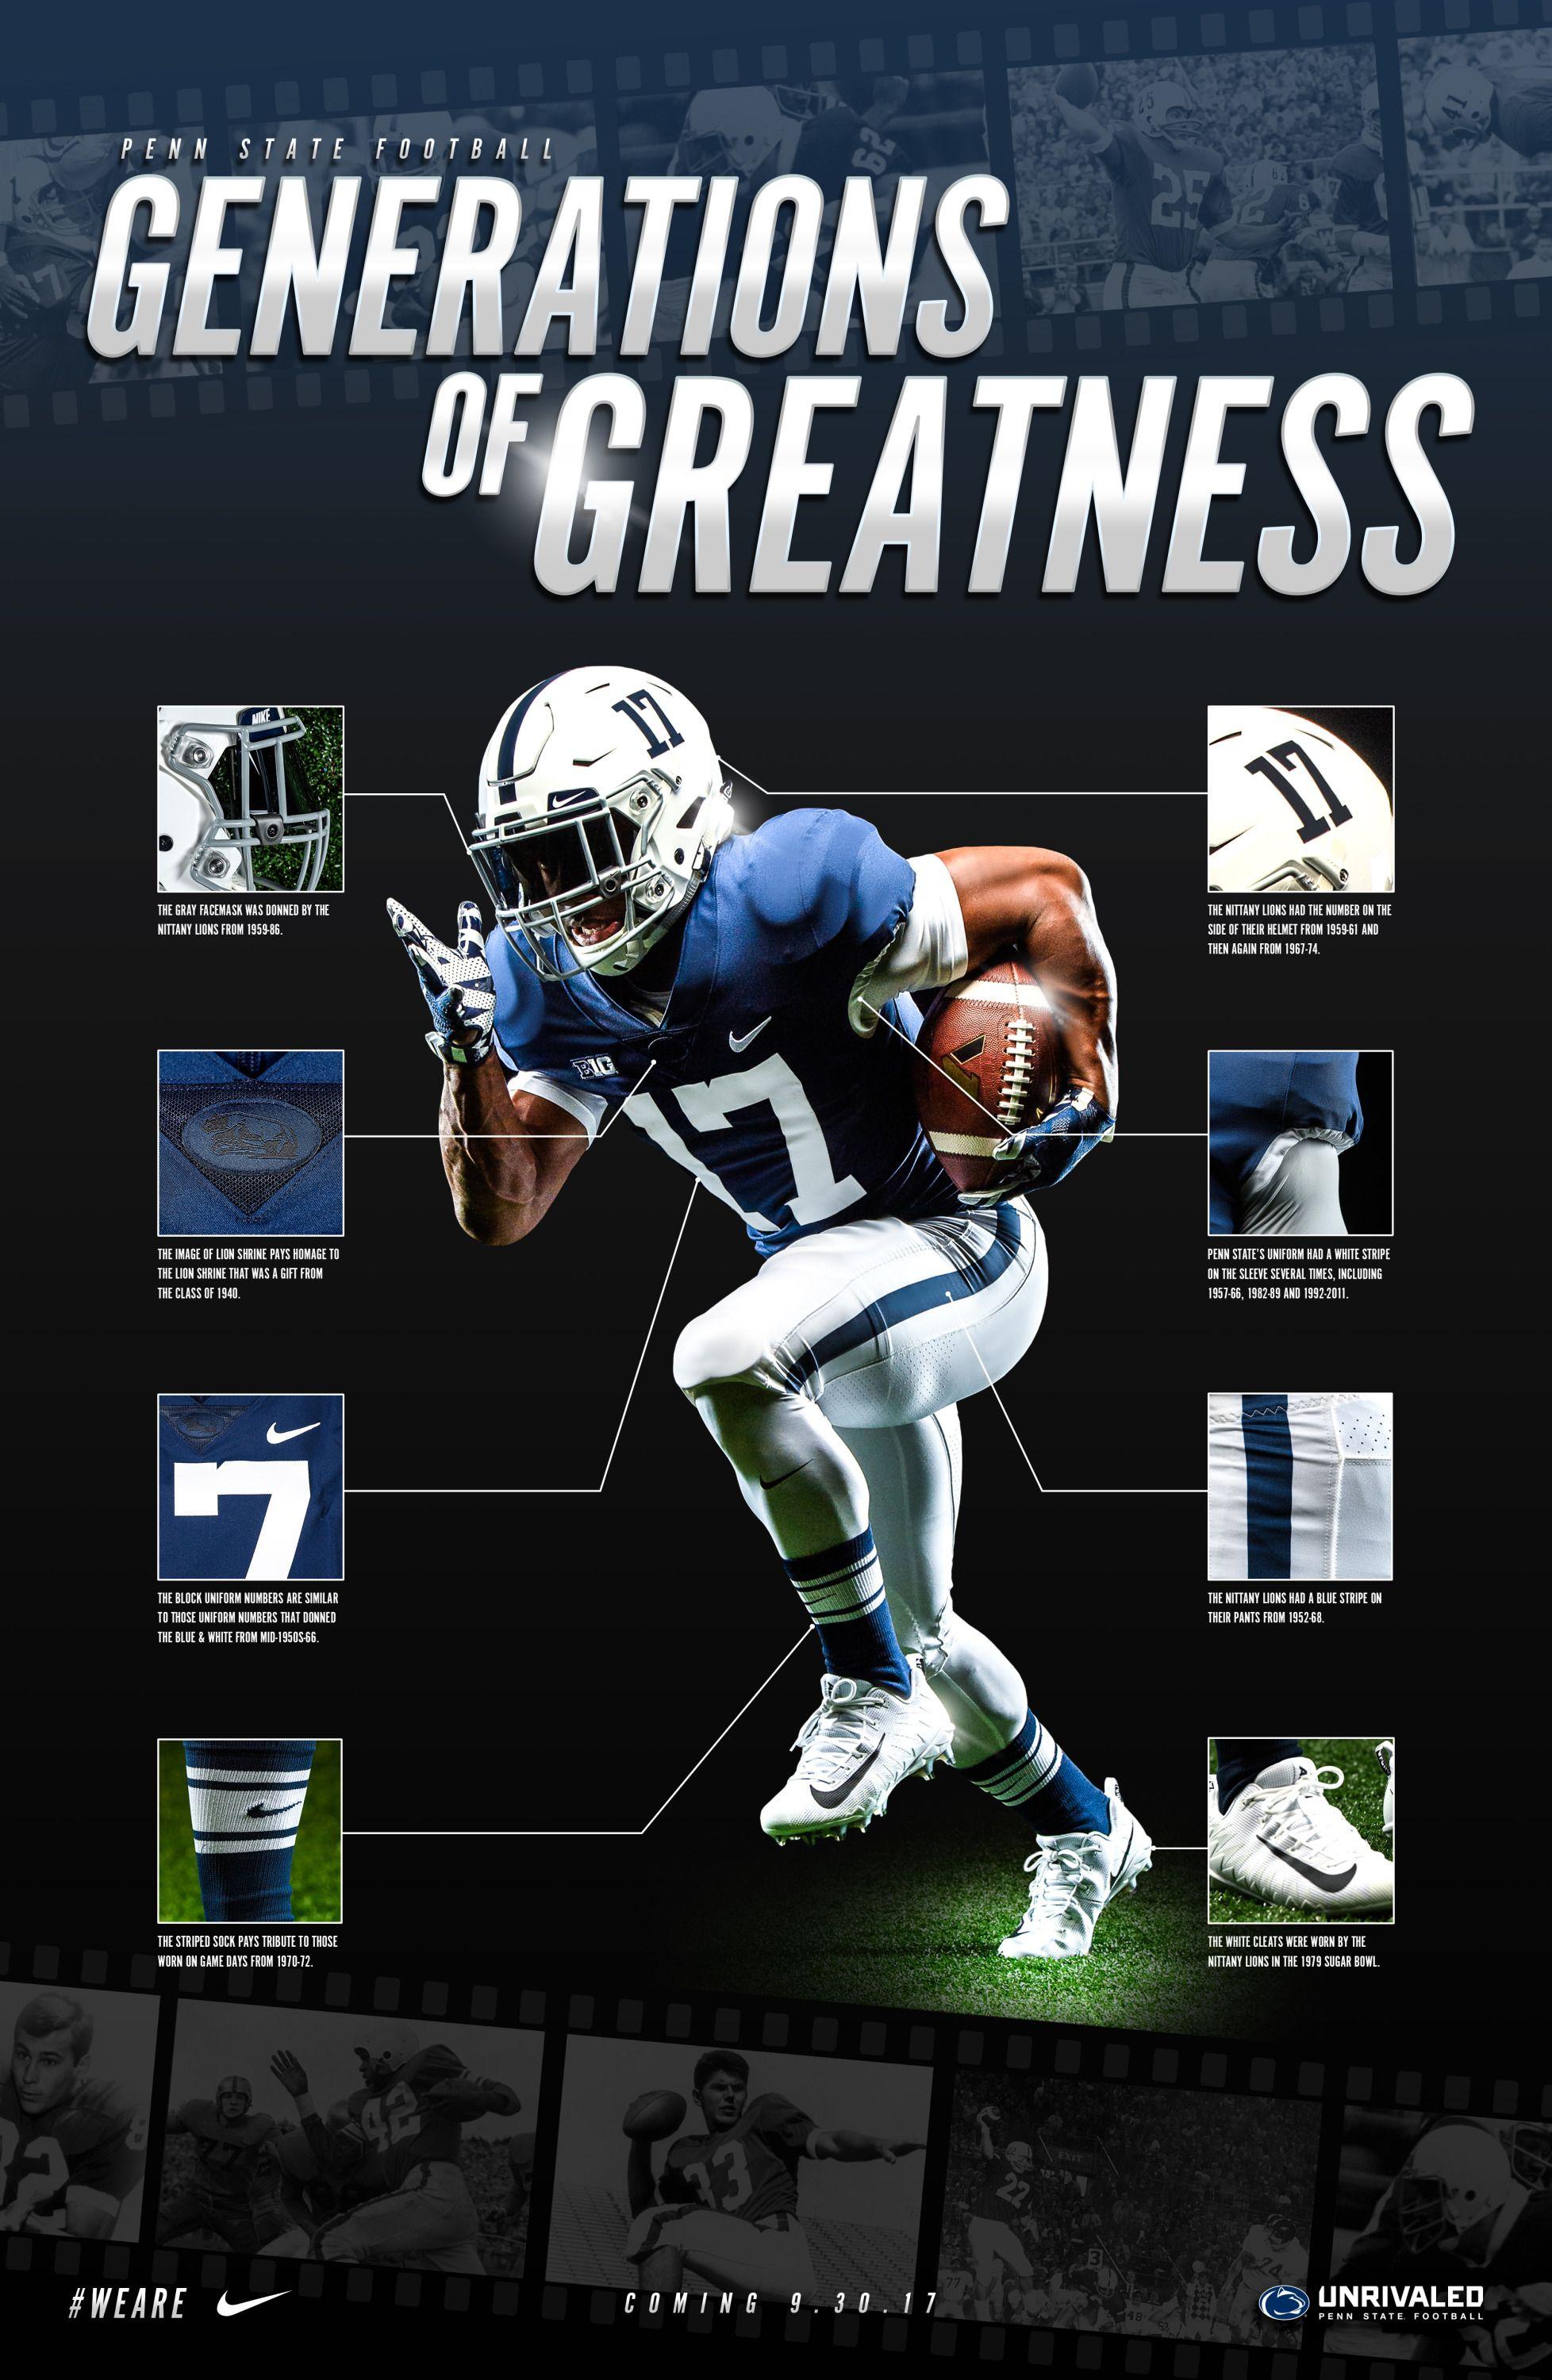 GOPSUSPORTS.com FB Announces Generations of Greatness Game